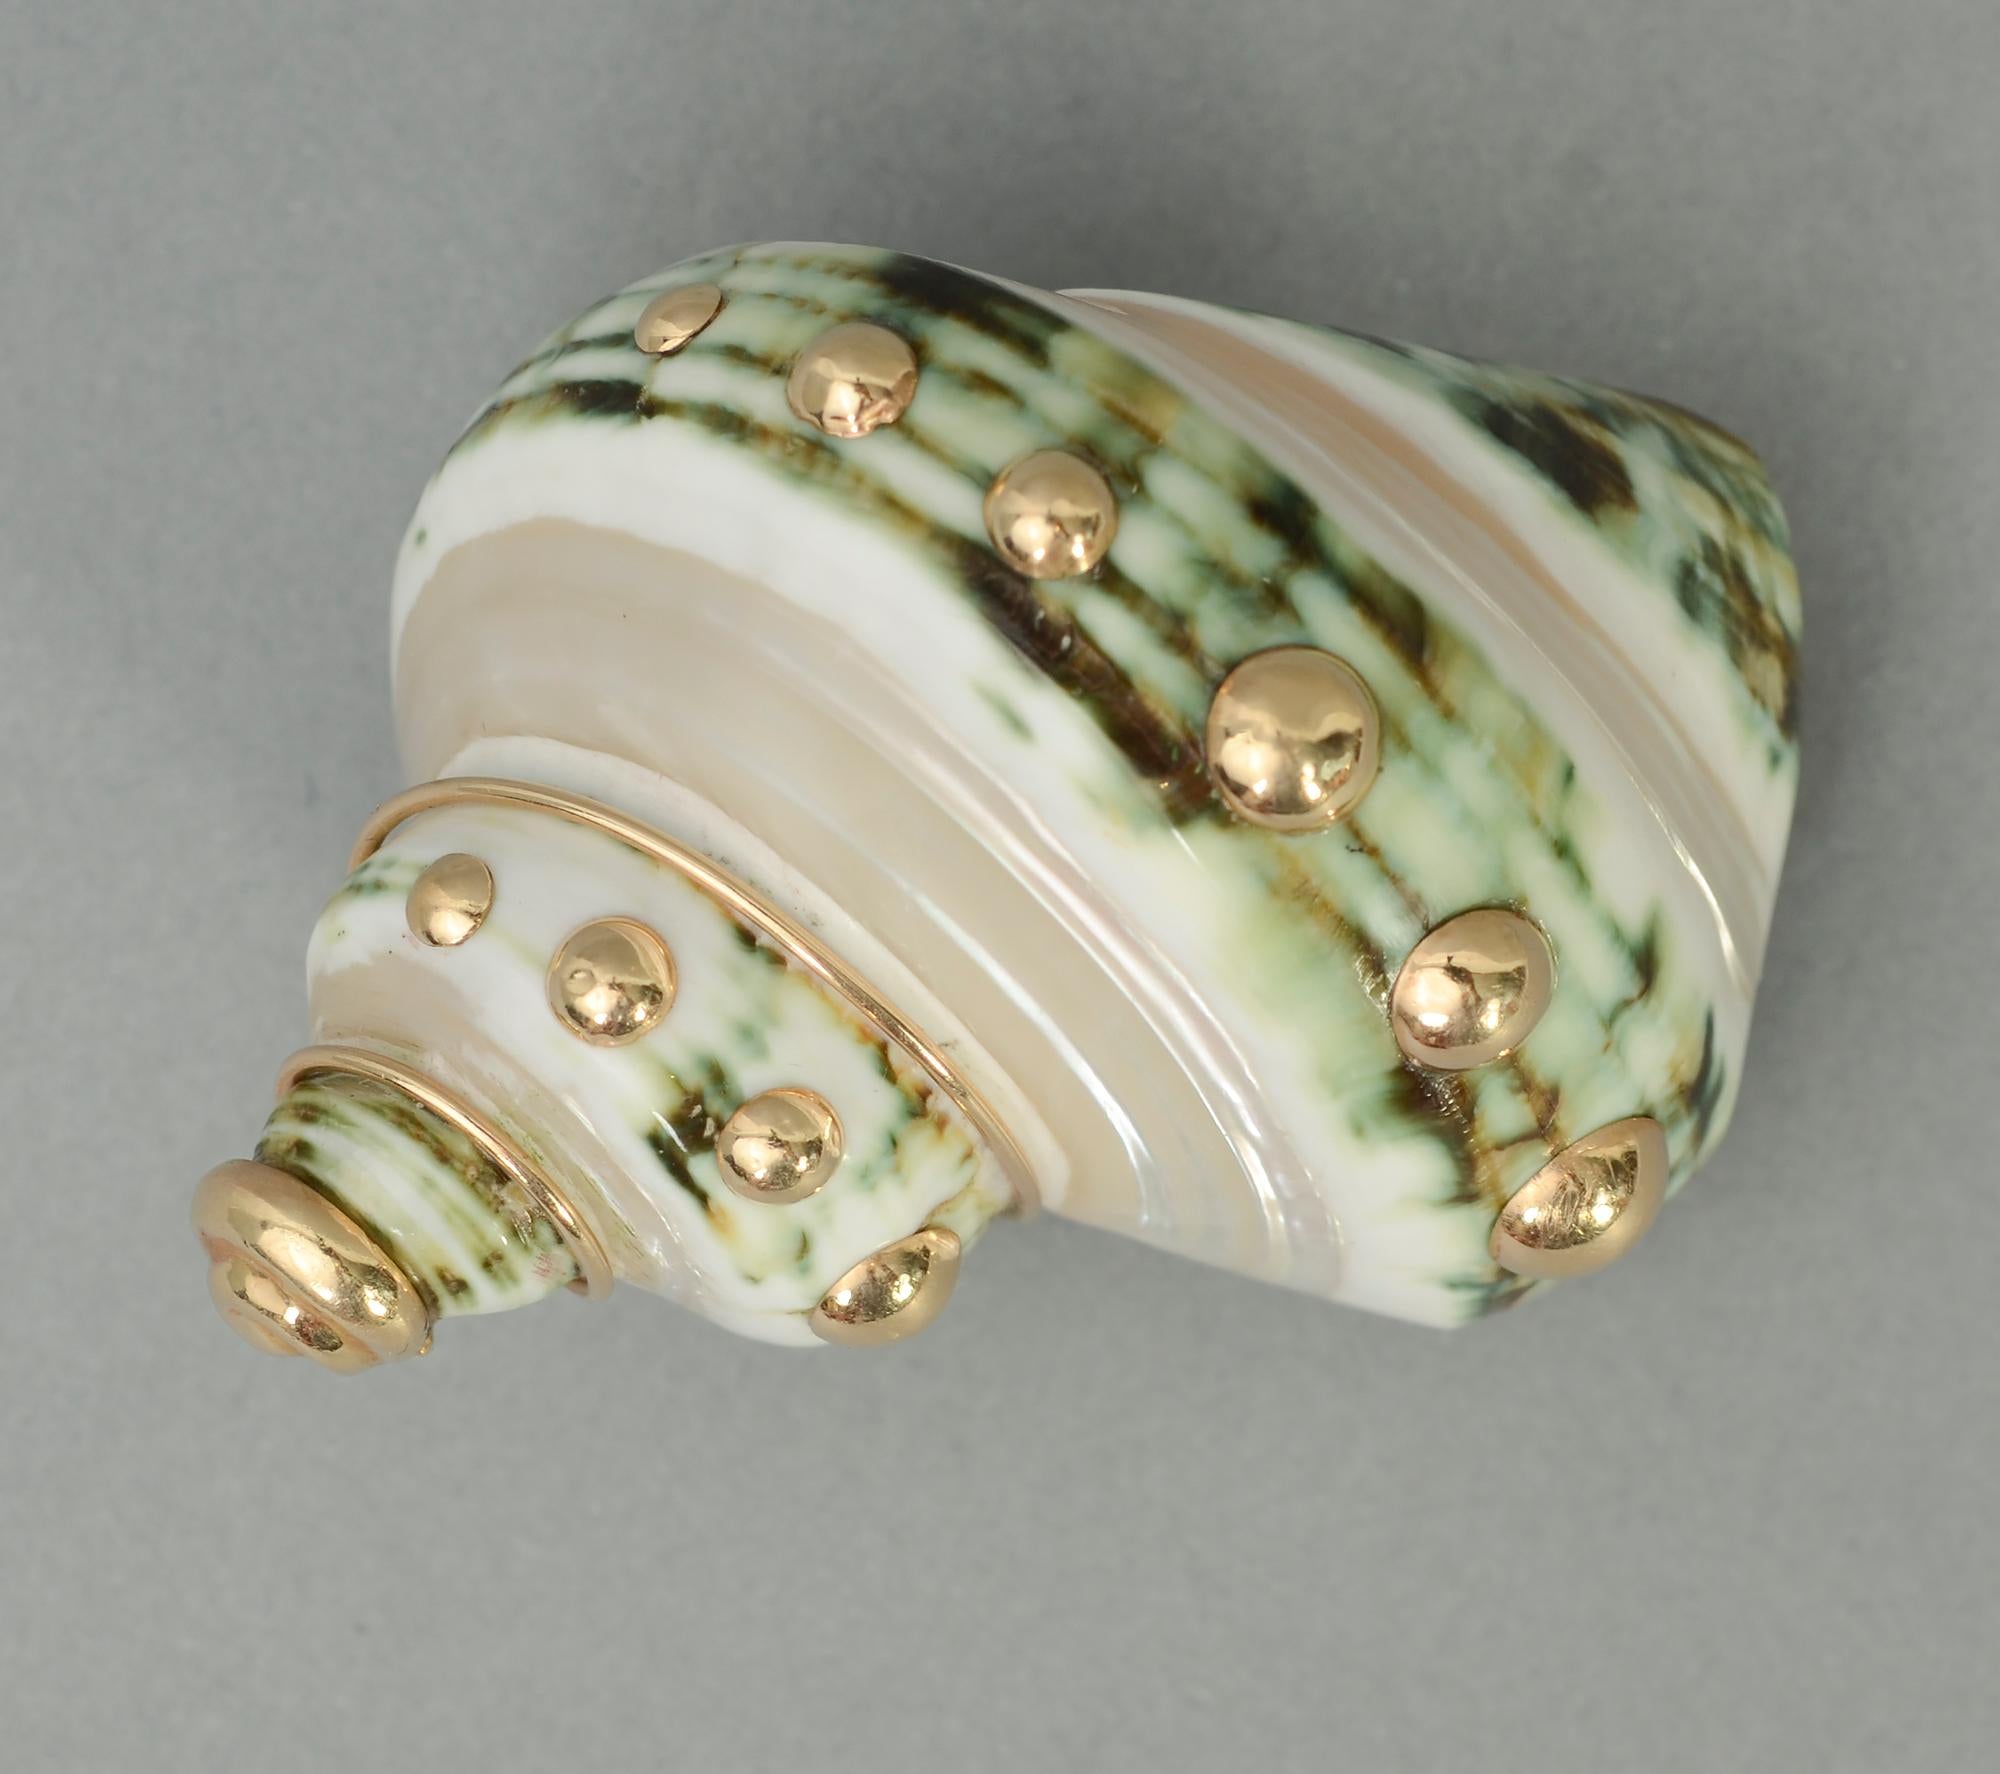 Beautiful natural shell brooch by Maz. The green has lovely shading from light to dark. Around the shell are gold dots topped with a gold shell shaped spiral. The brooch can be worn in several directions.
This brooch can only be shipped within the